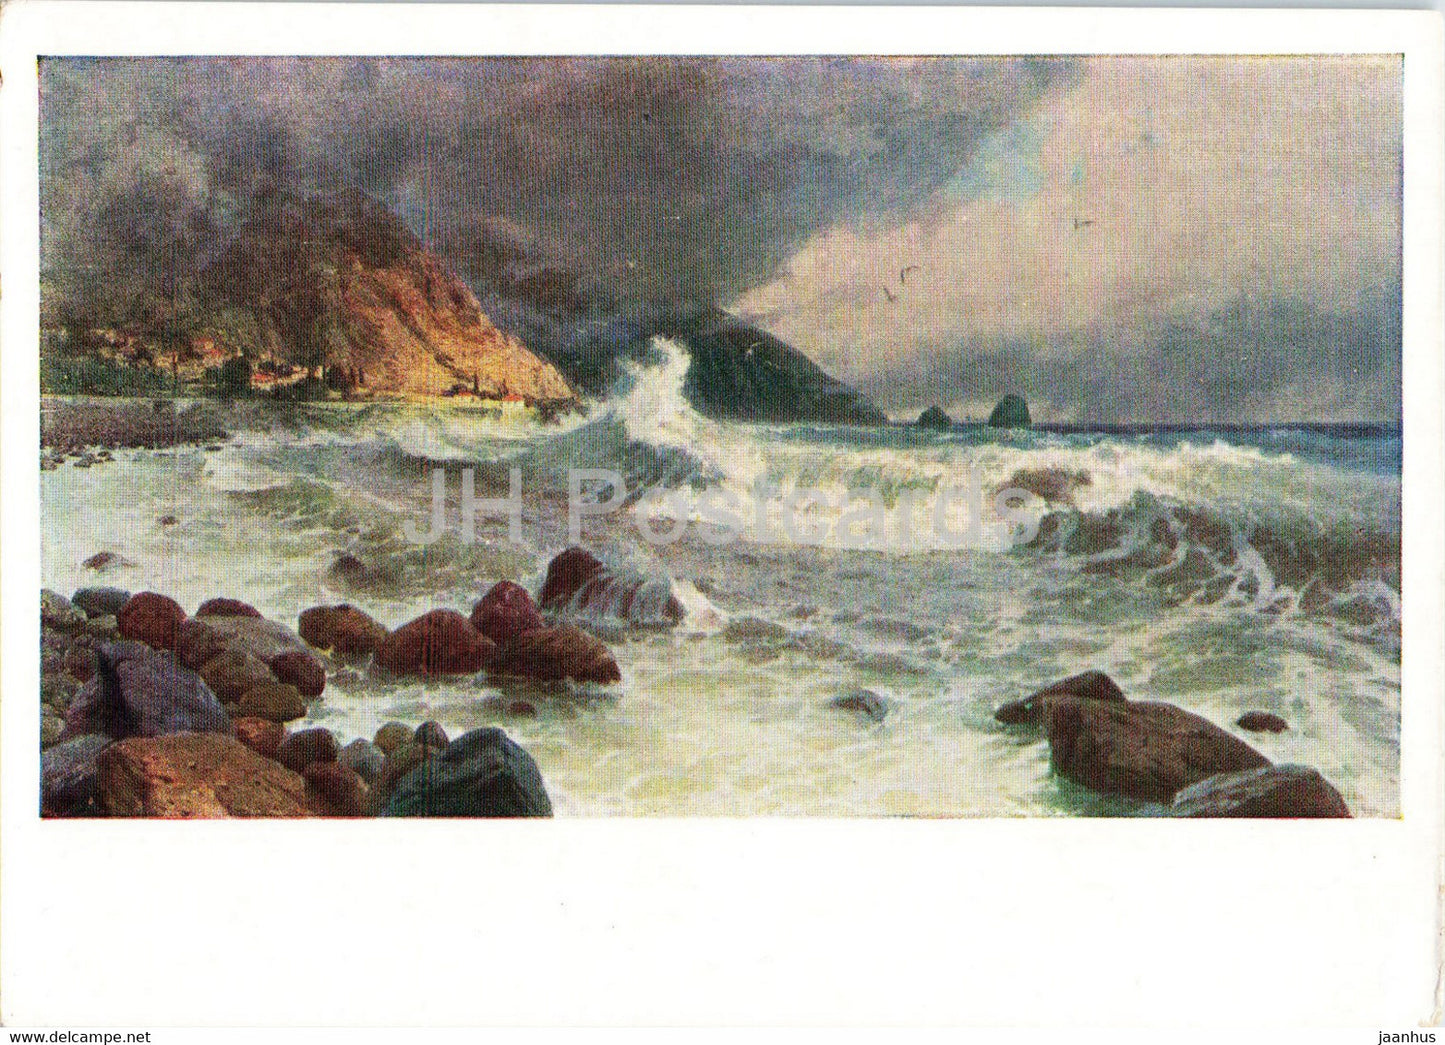 painting by V. Puzyrkov - The Storm - Crimea - Russian art - 1961 - Russia USSR - unused - JH Postcards